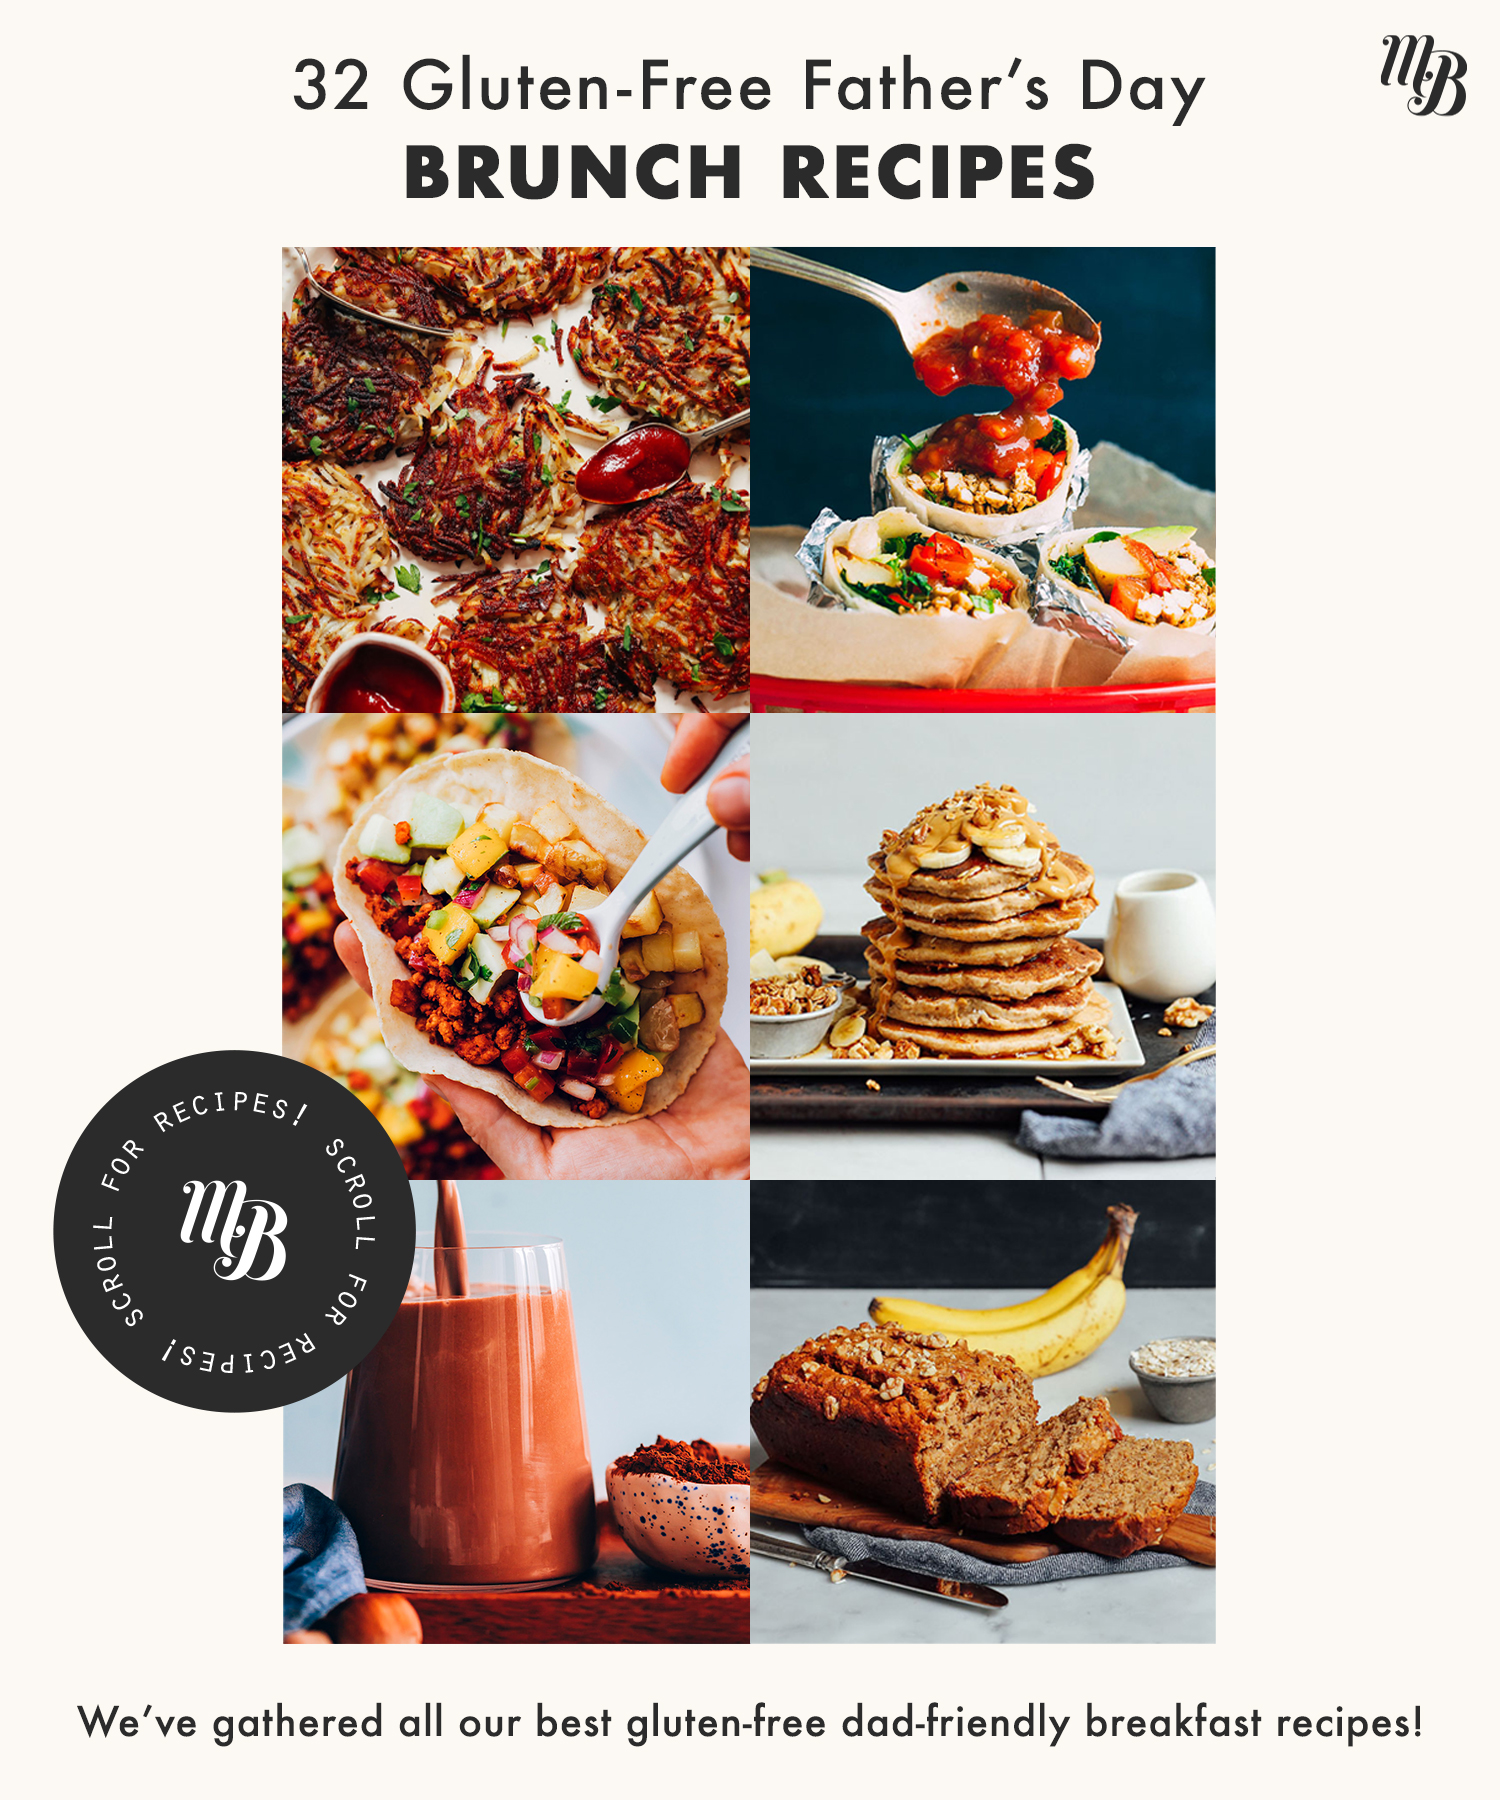 Assortment of gluten-free Father's Day brunch dishes